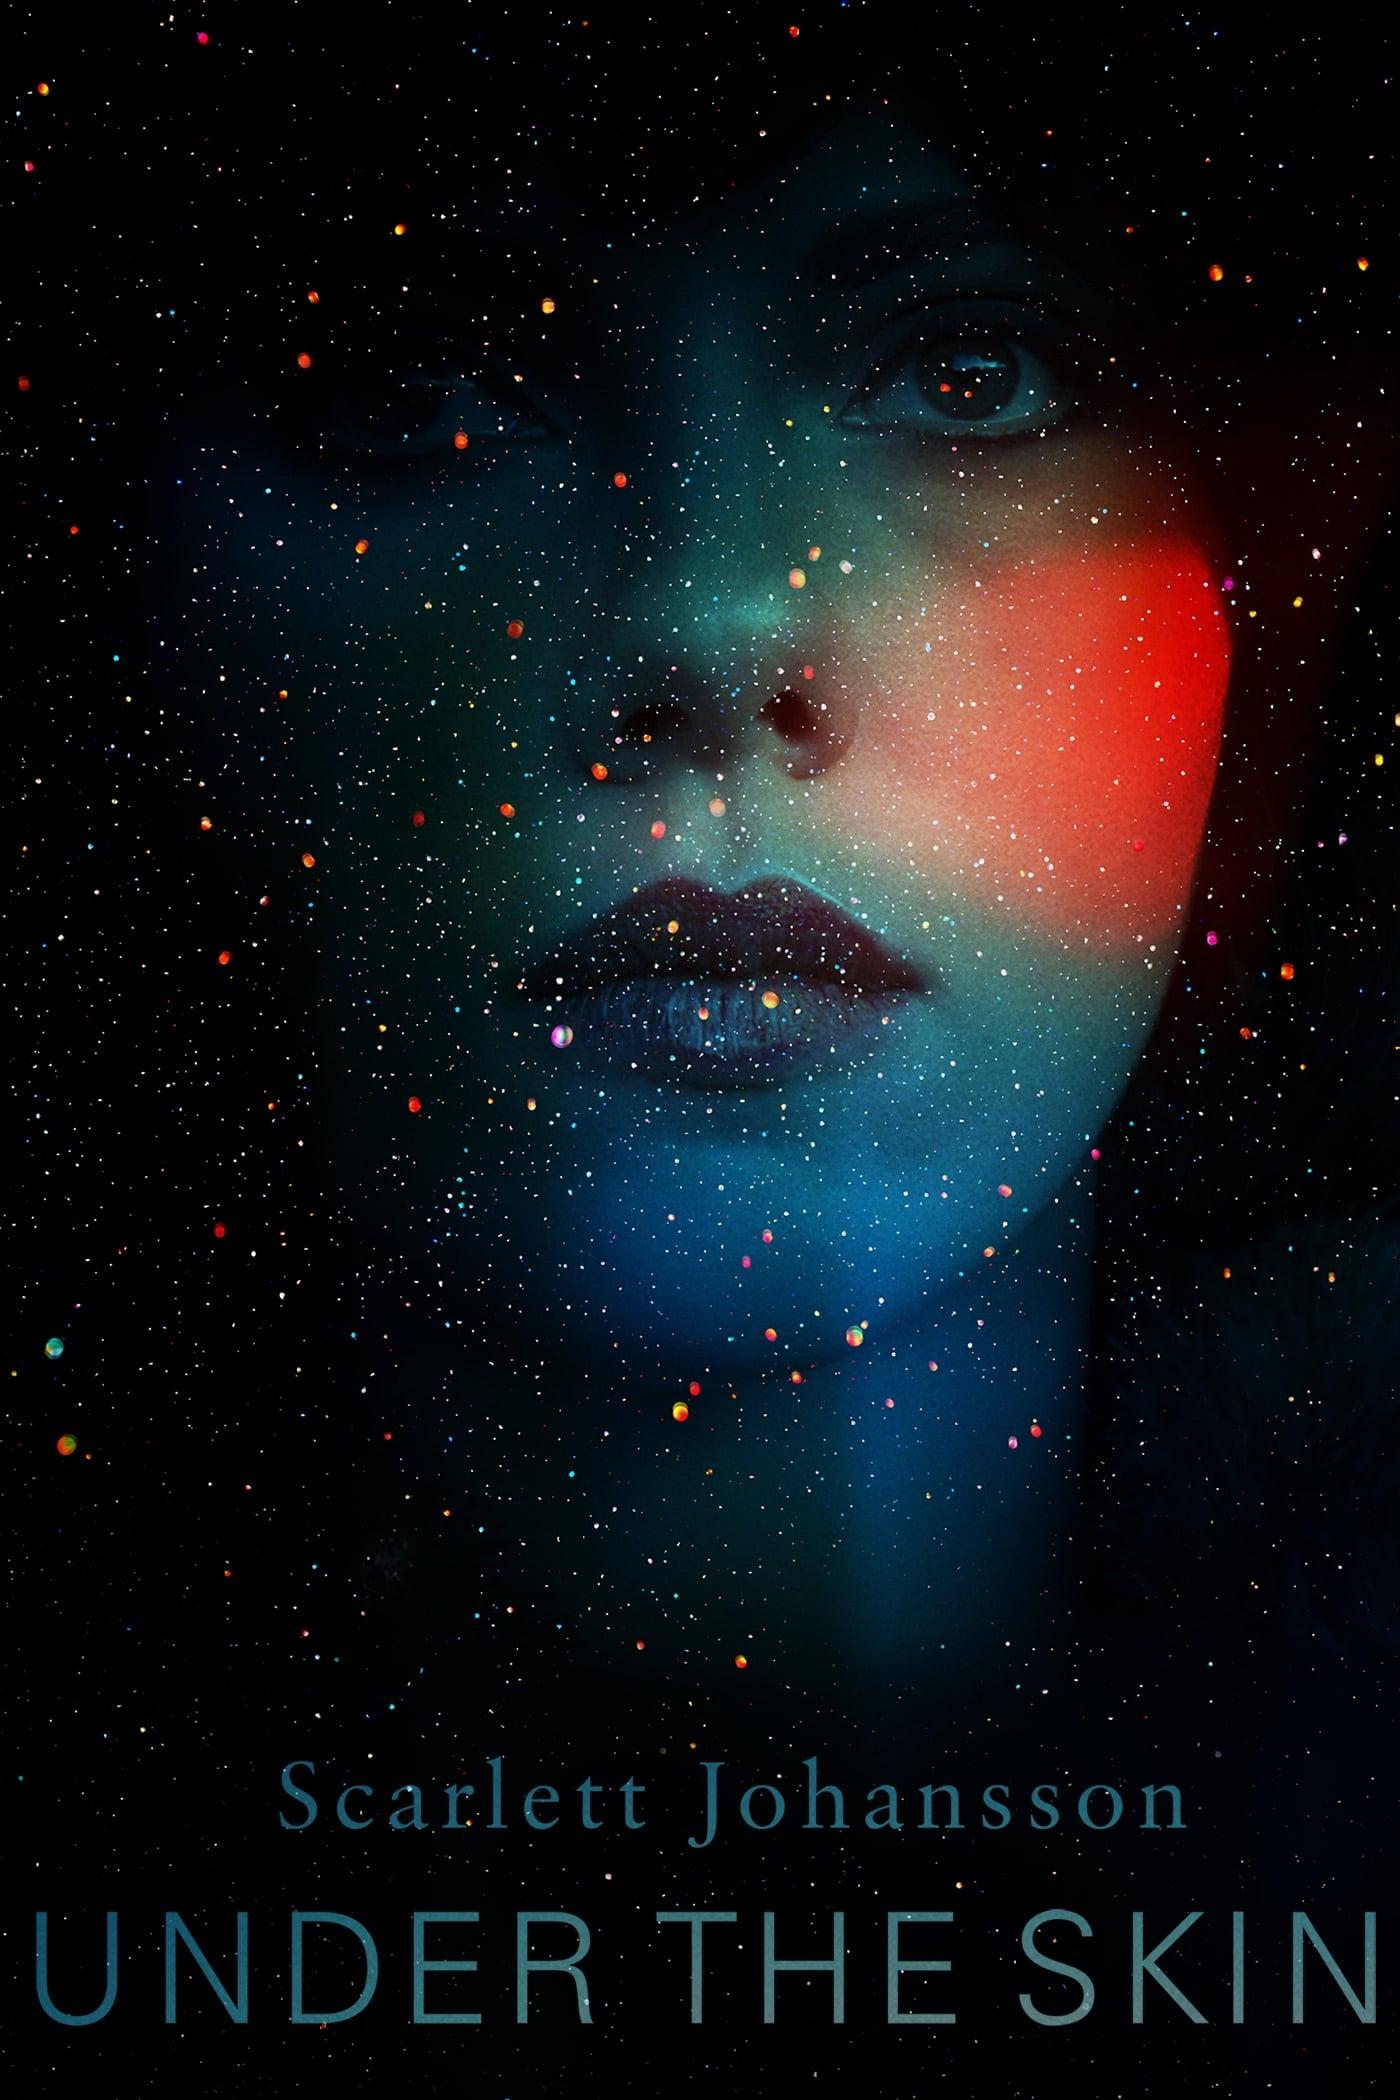 Under the Skin poster